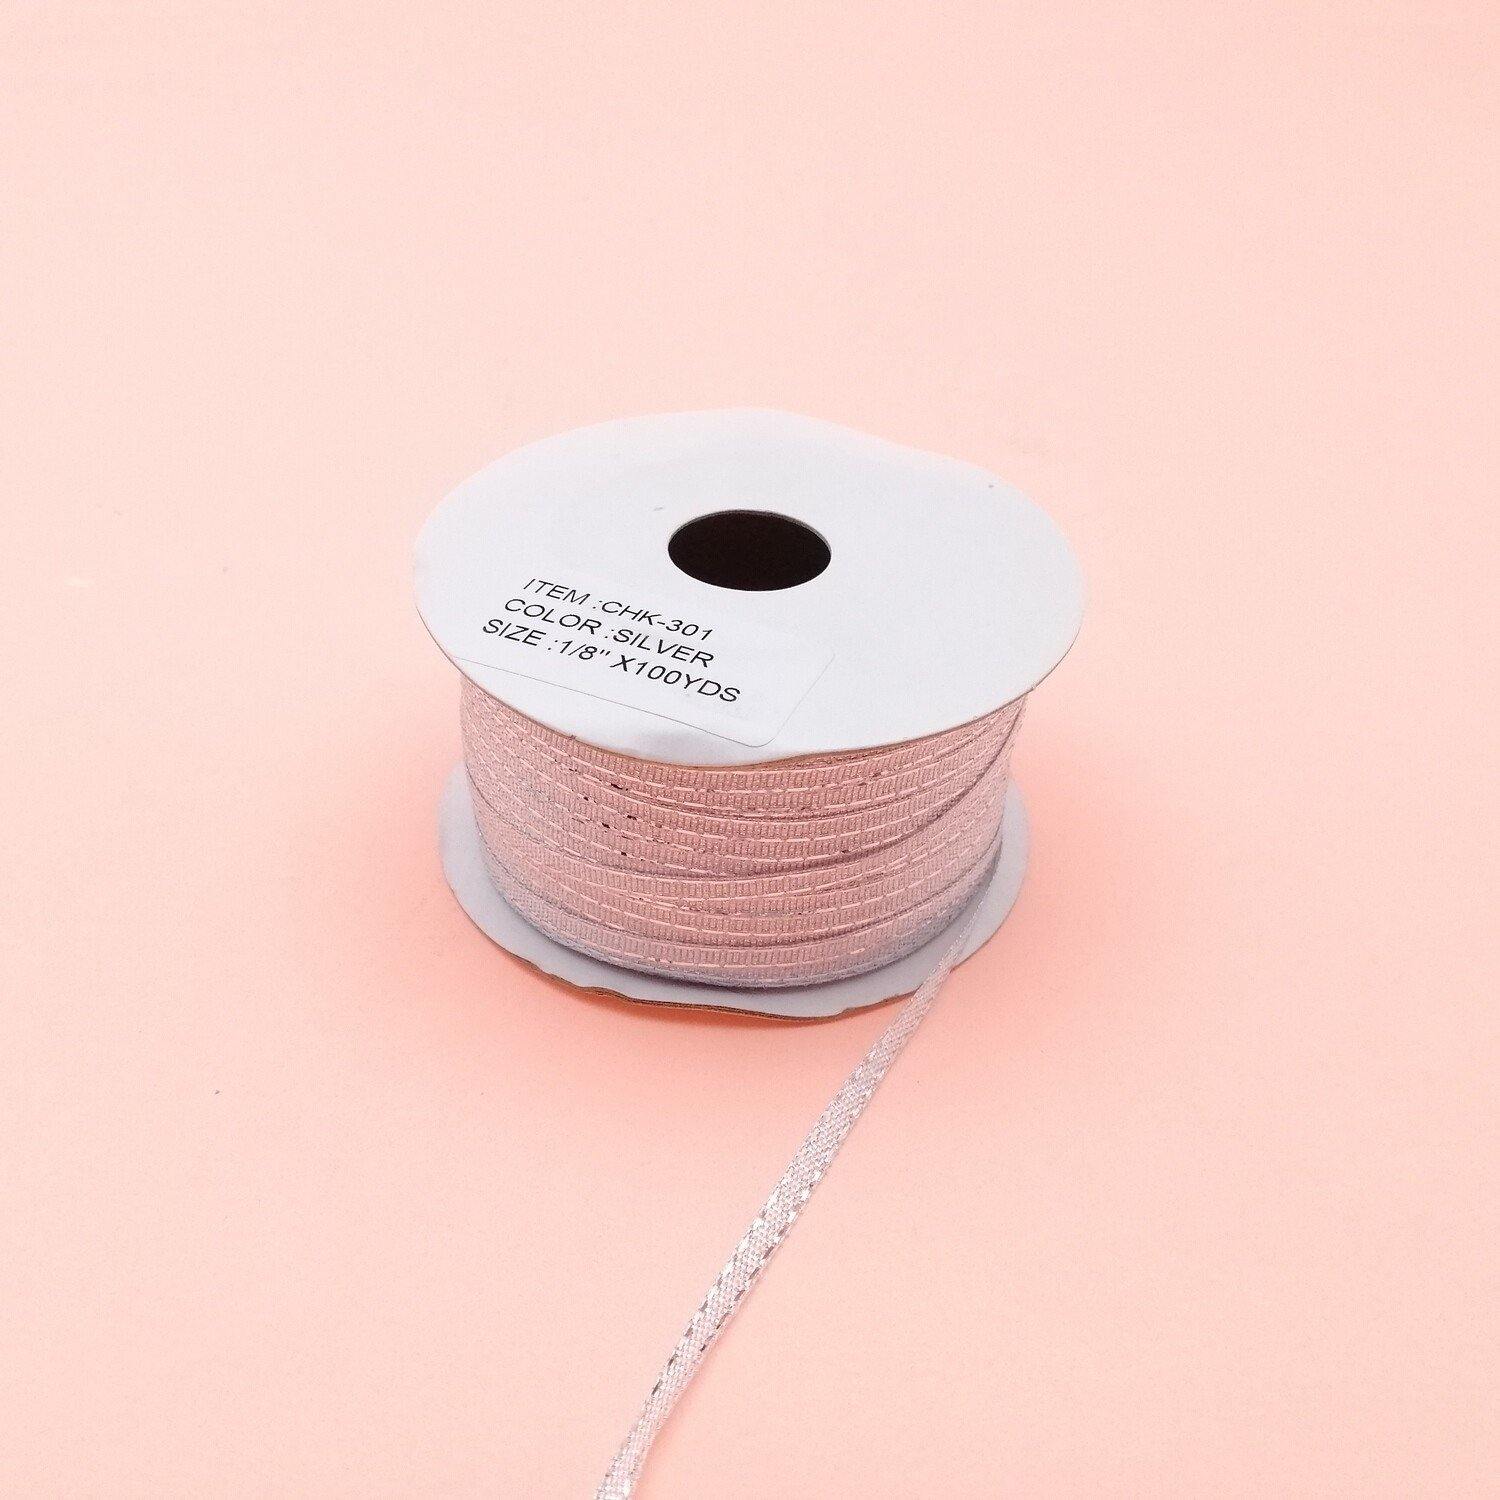 1/8" SILVER RIBBON (301) 1ROLL (100YDS) - Kitchen Convenience: Ingredients & Supplies Delivery